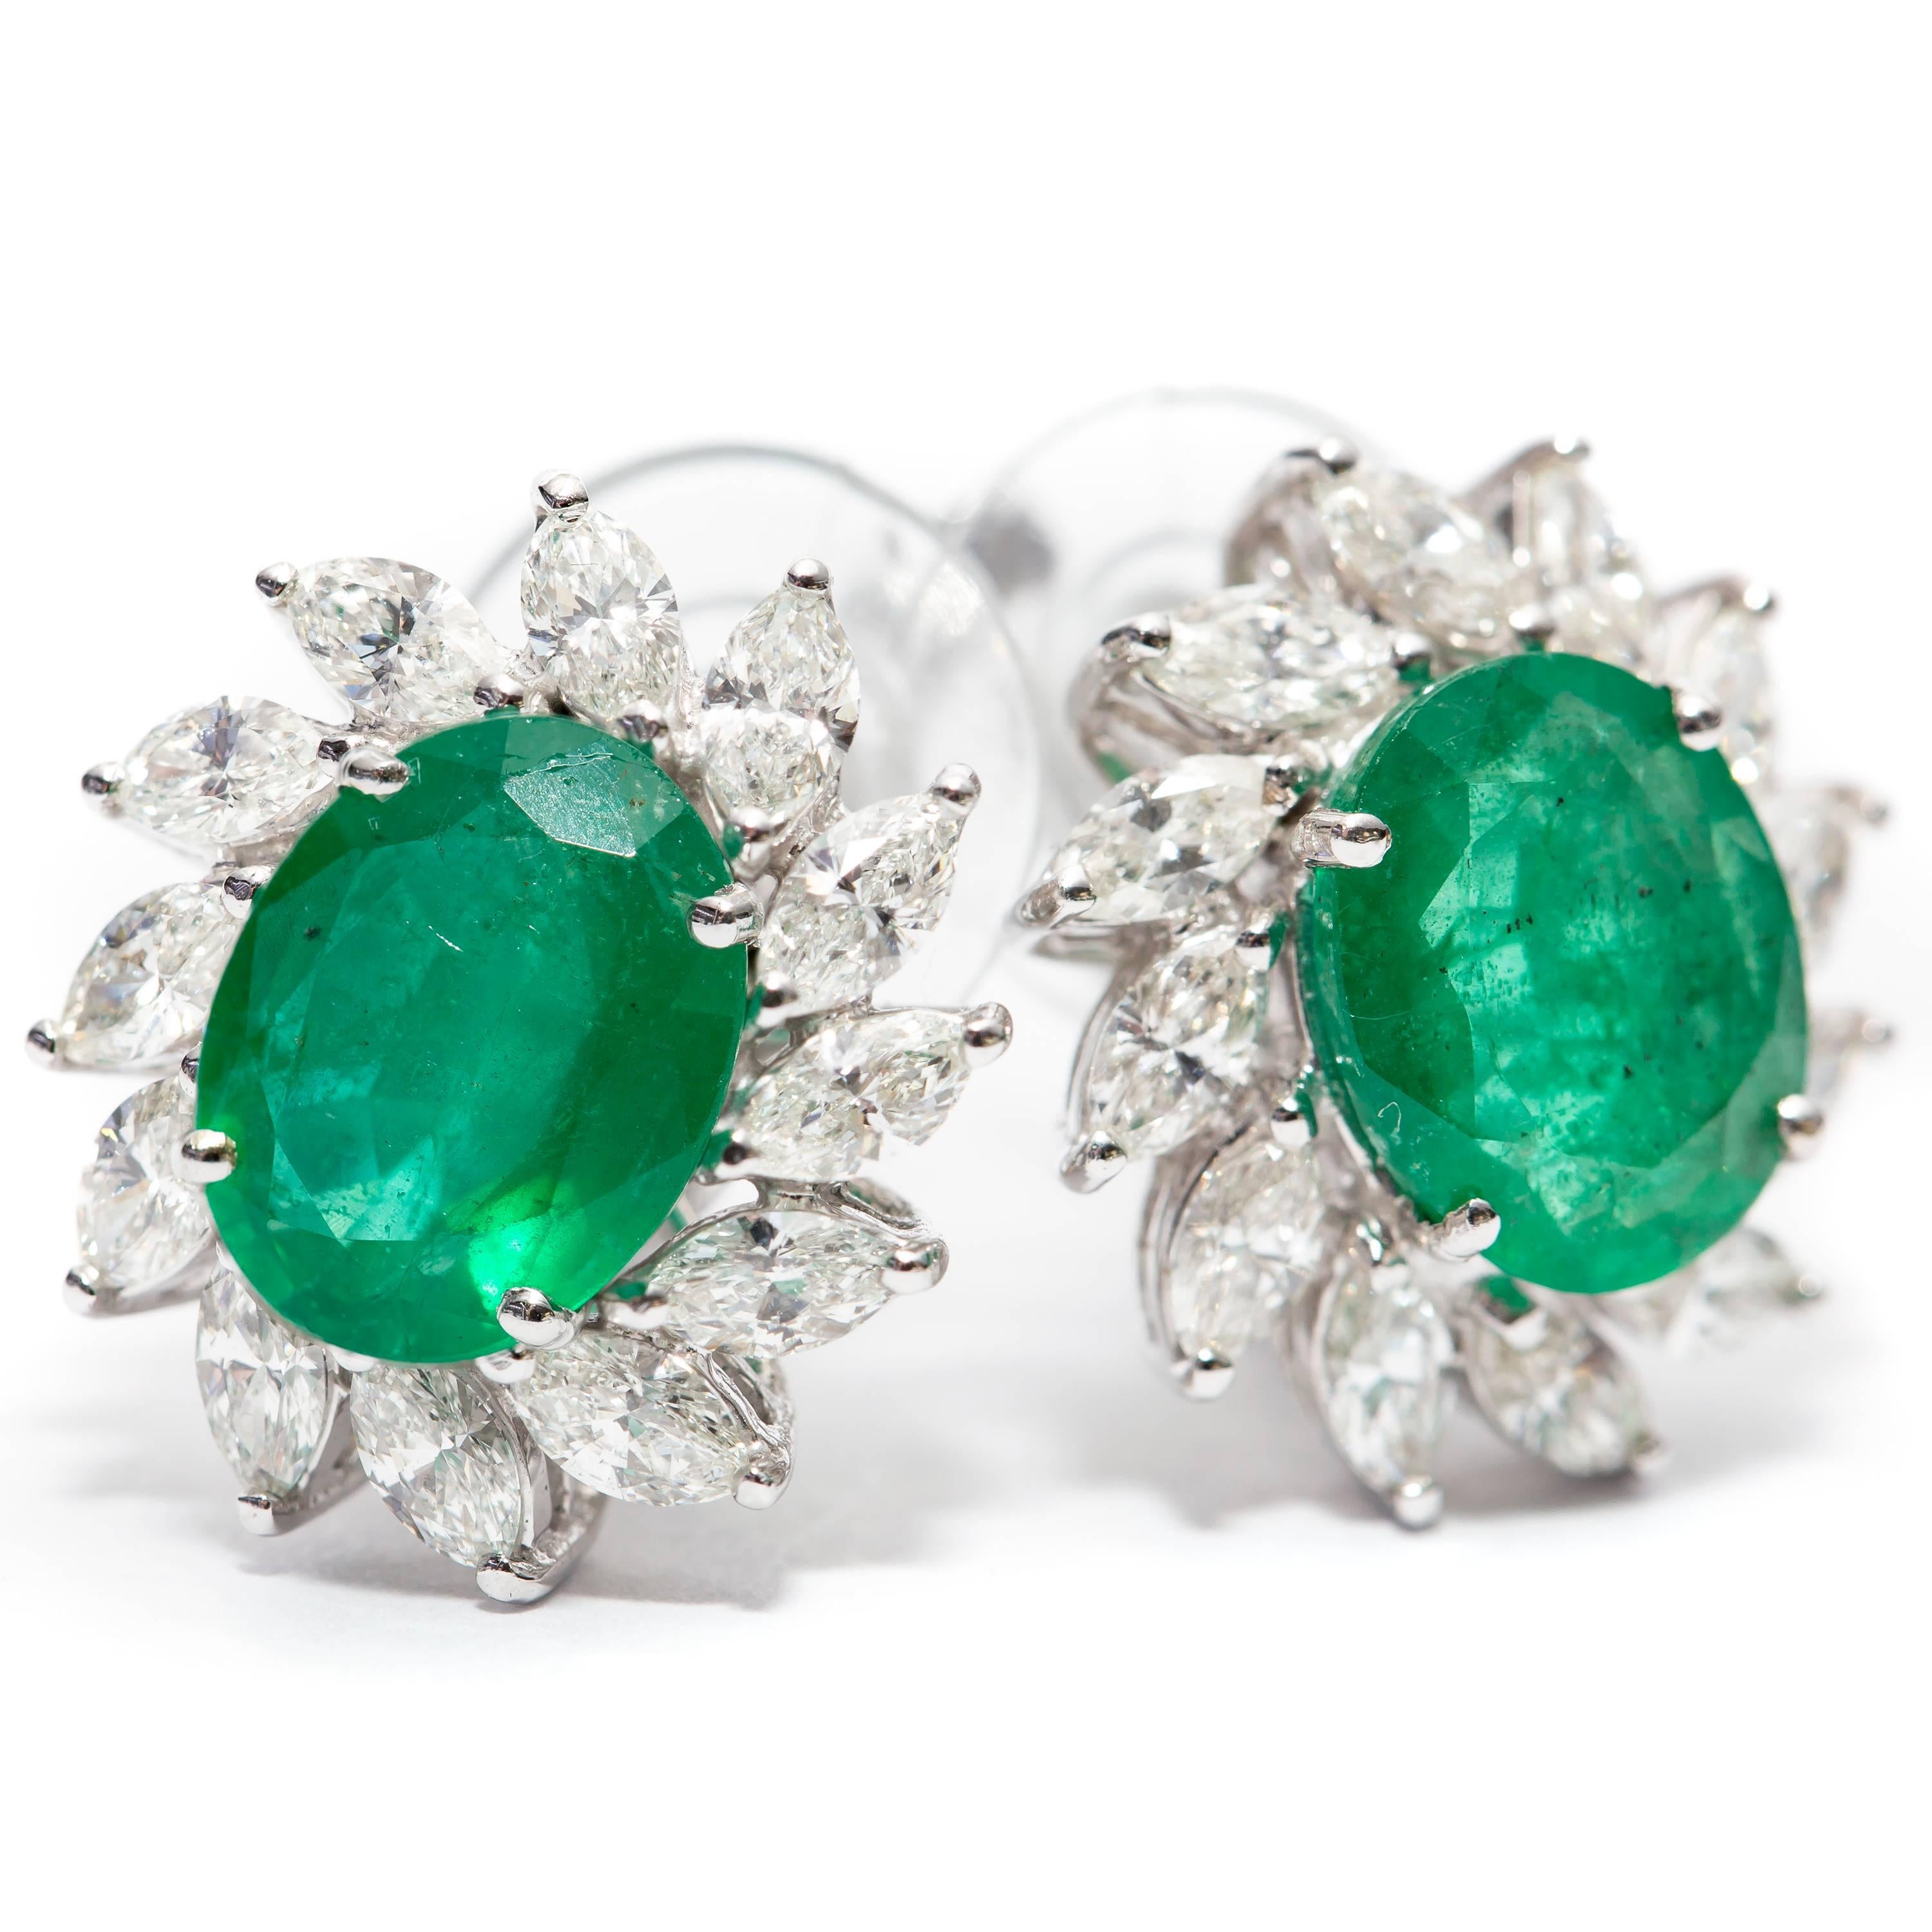 3.50 Carat Emerald Earrings expertly contrasted with the pure radiance of 1.50 Carat Marquise White Diamonds. Set in 18 Karat White Gold these beautiful earrings are perfect for any occasion, and have a recent certificate from EDR (European Diamond